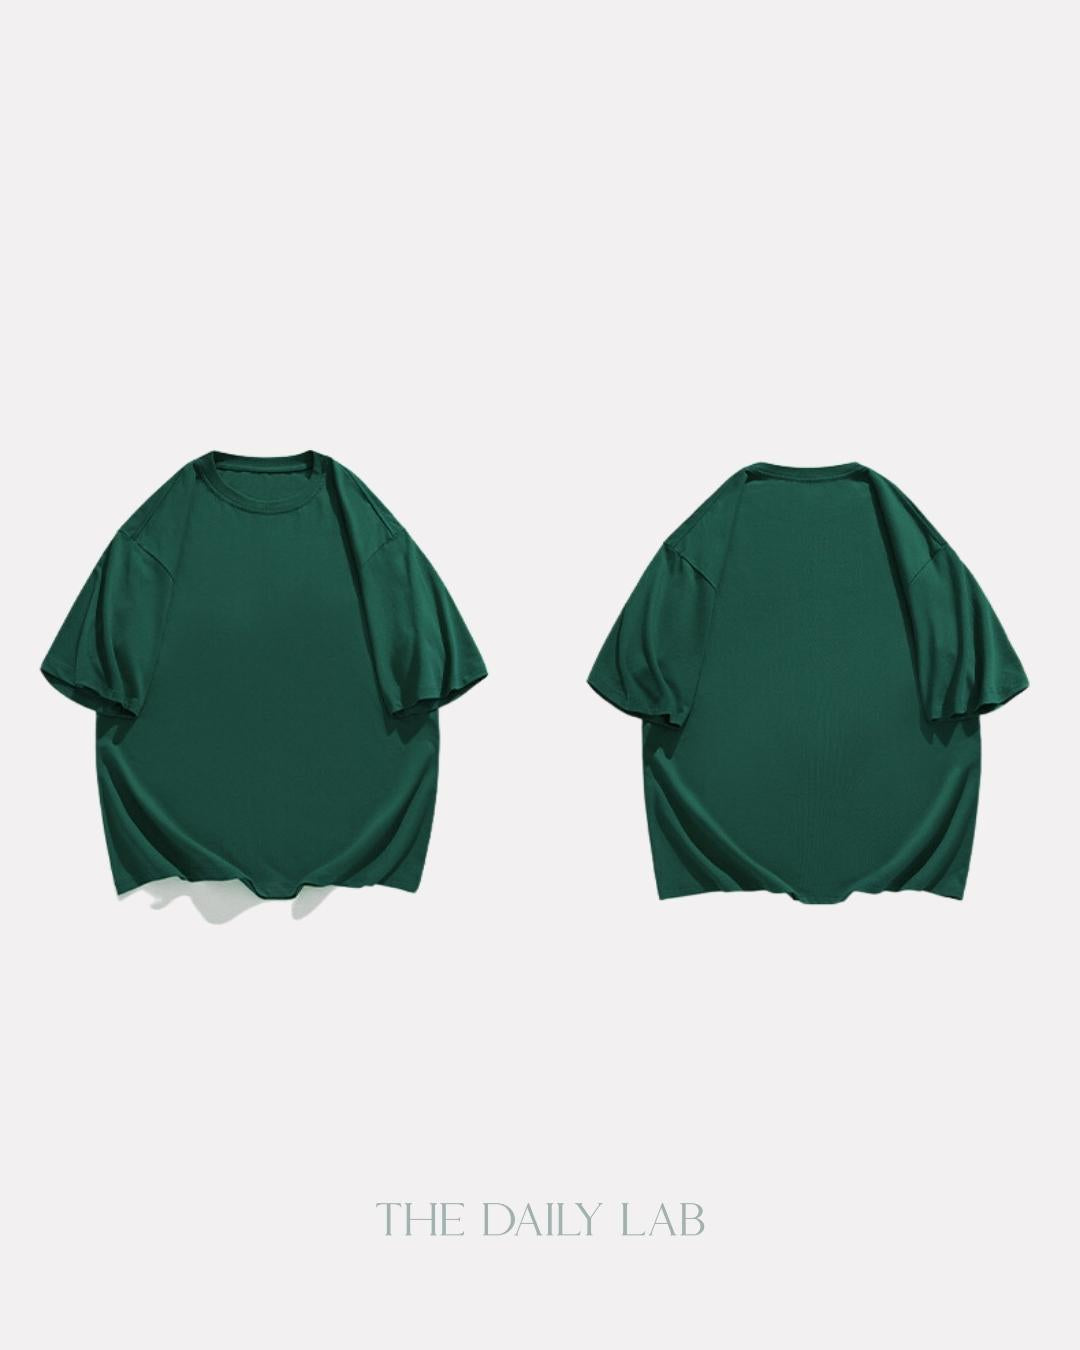 200G Cotton Oversized Tee in Green (Size XL)